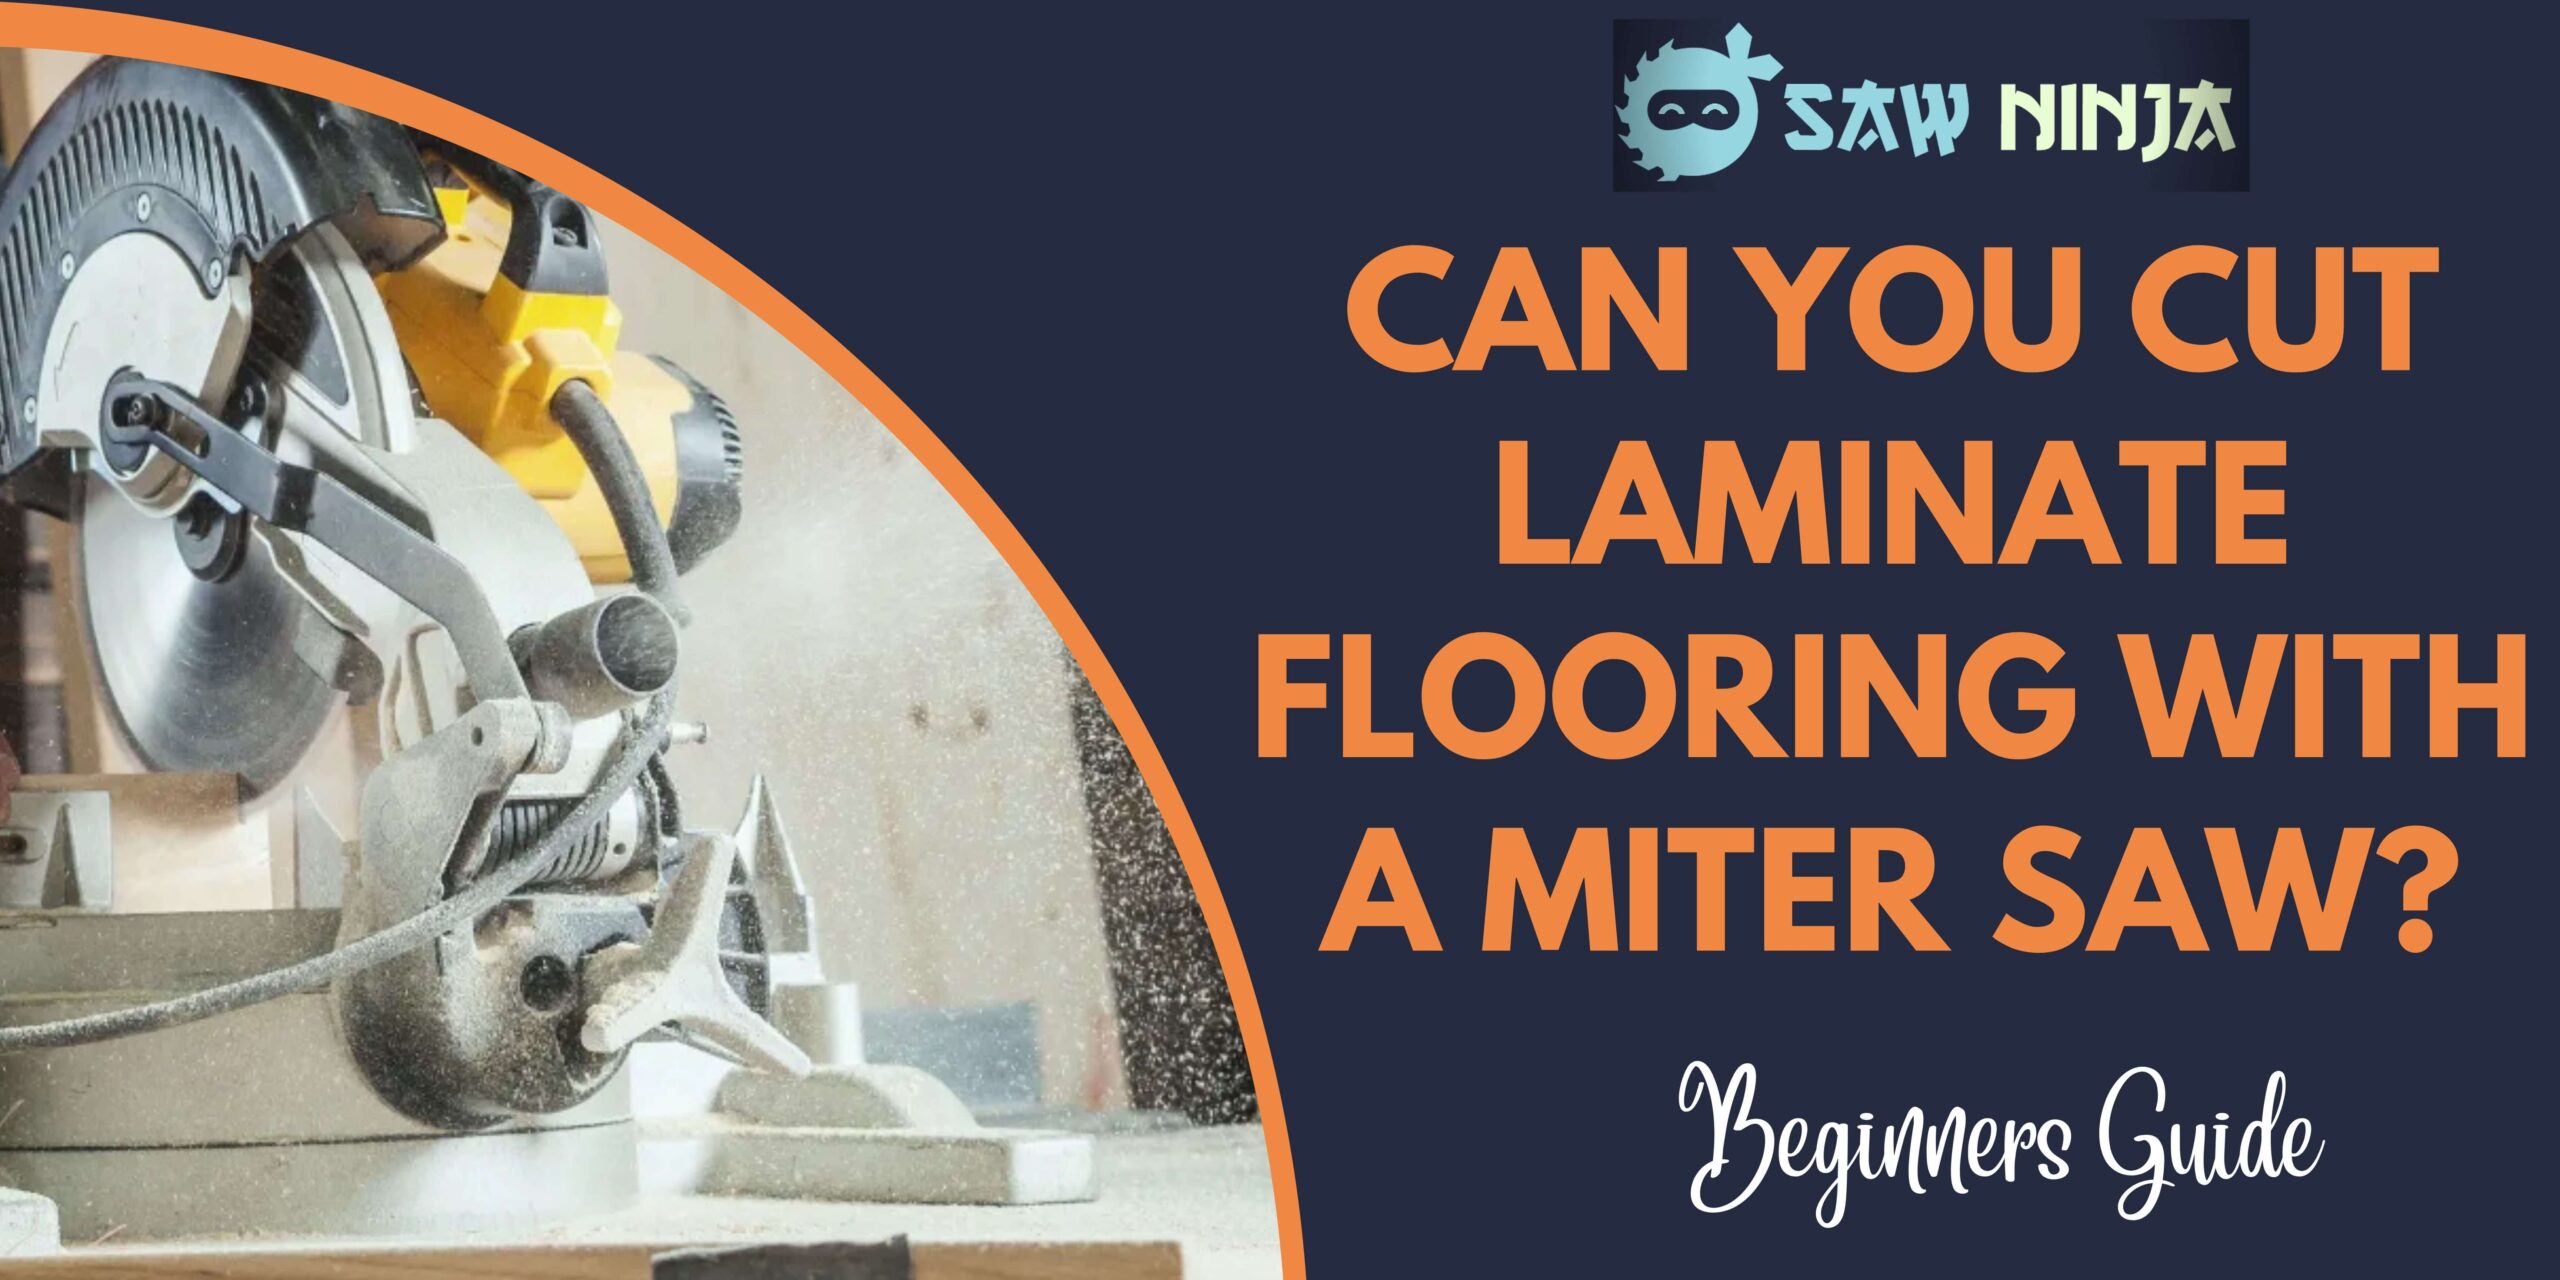 Can You Cut Laminate Flooring With a Miter Saw